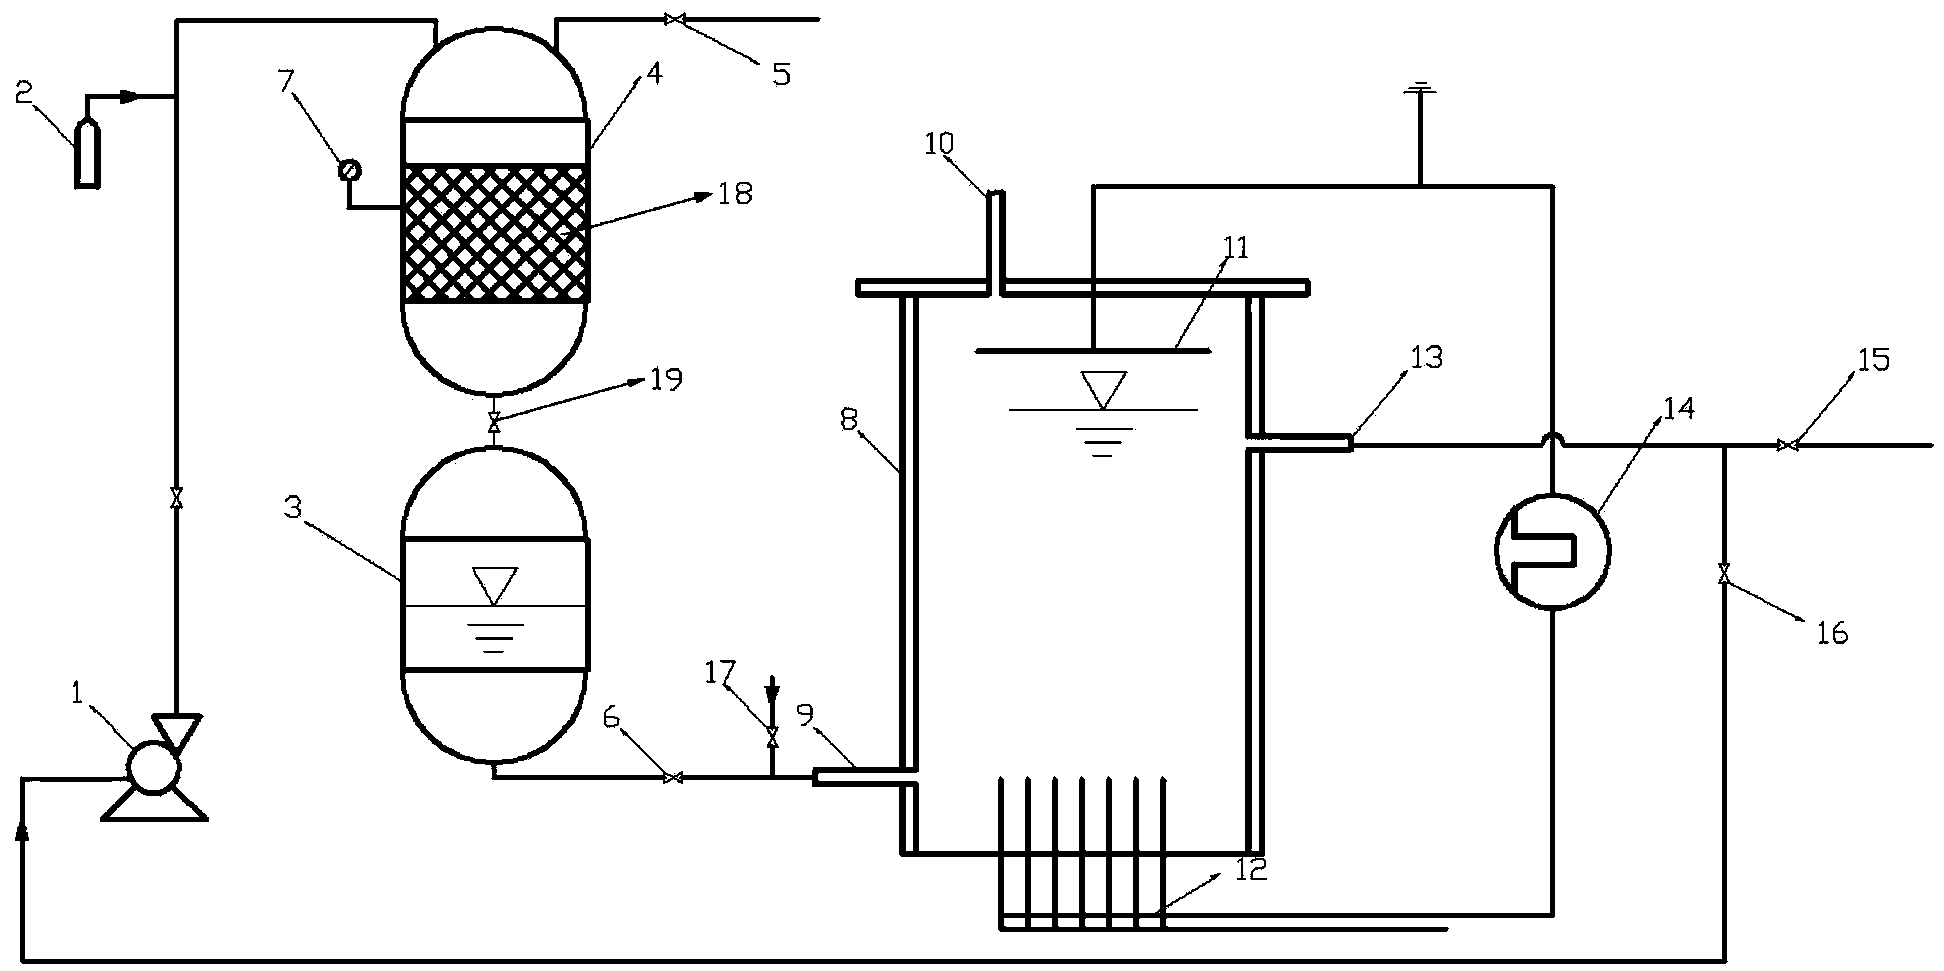 Partial-reflux pressurized and aerated type plasma sewage treatment device